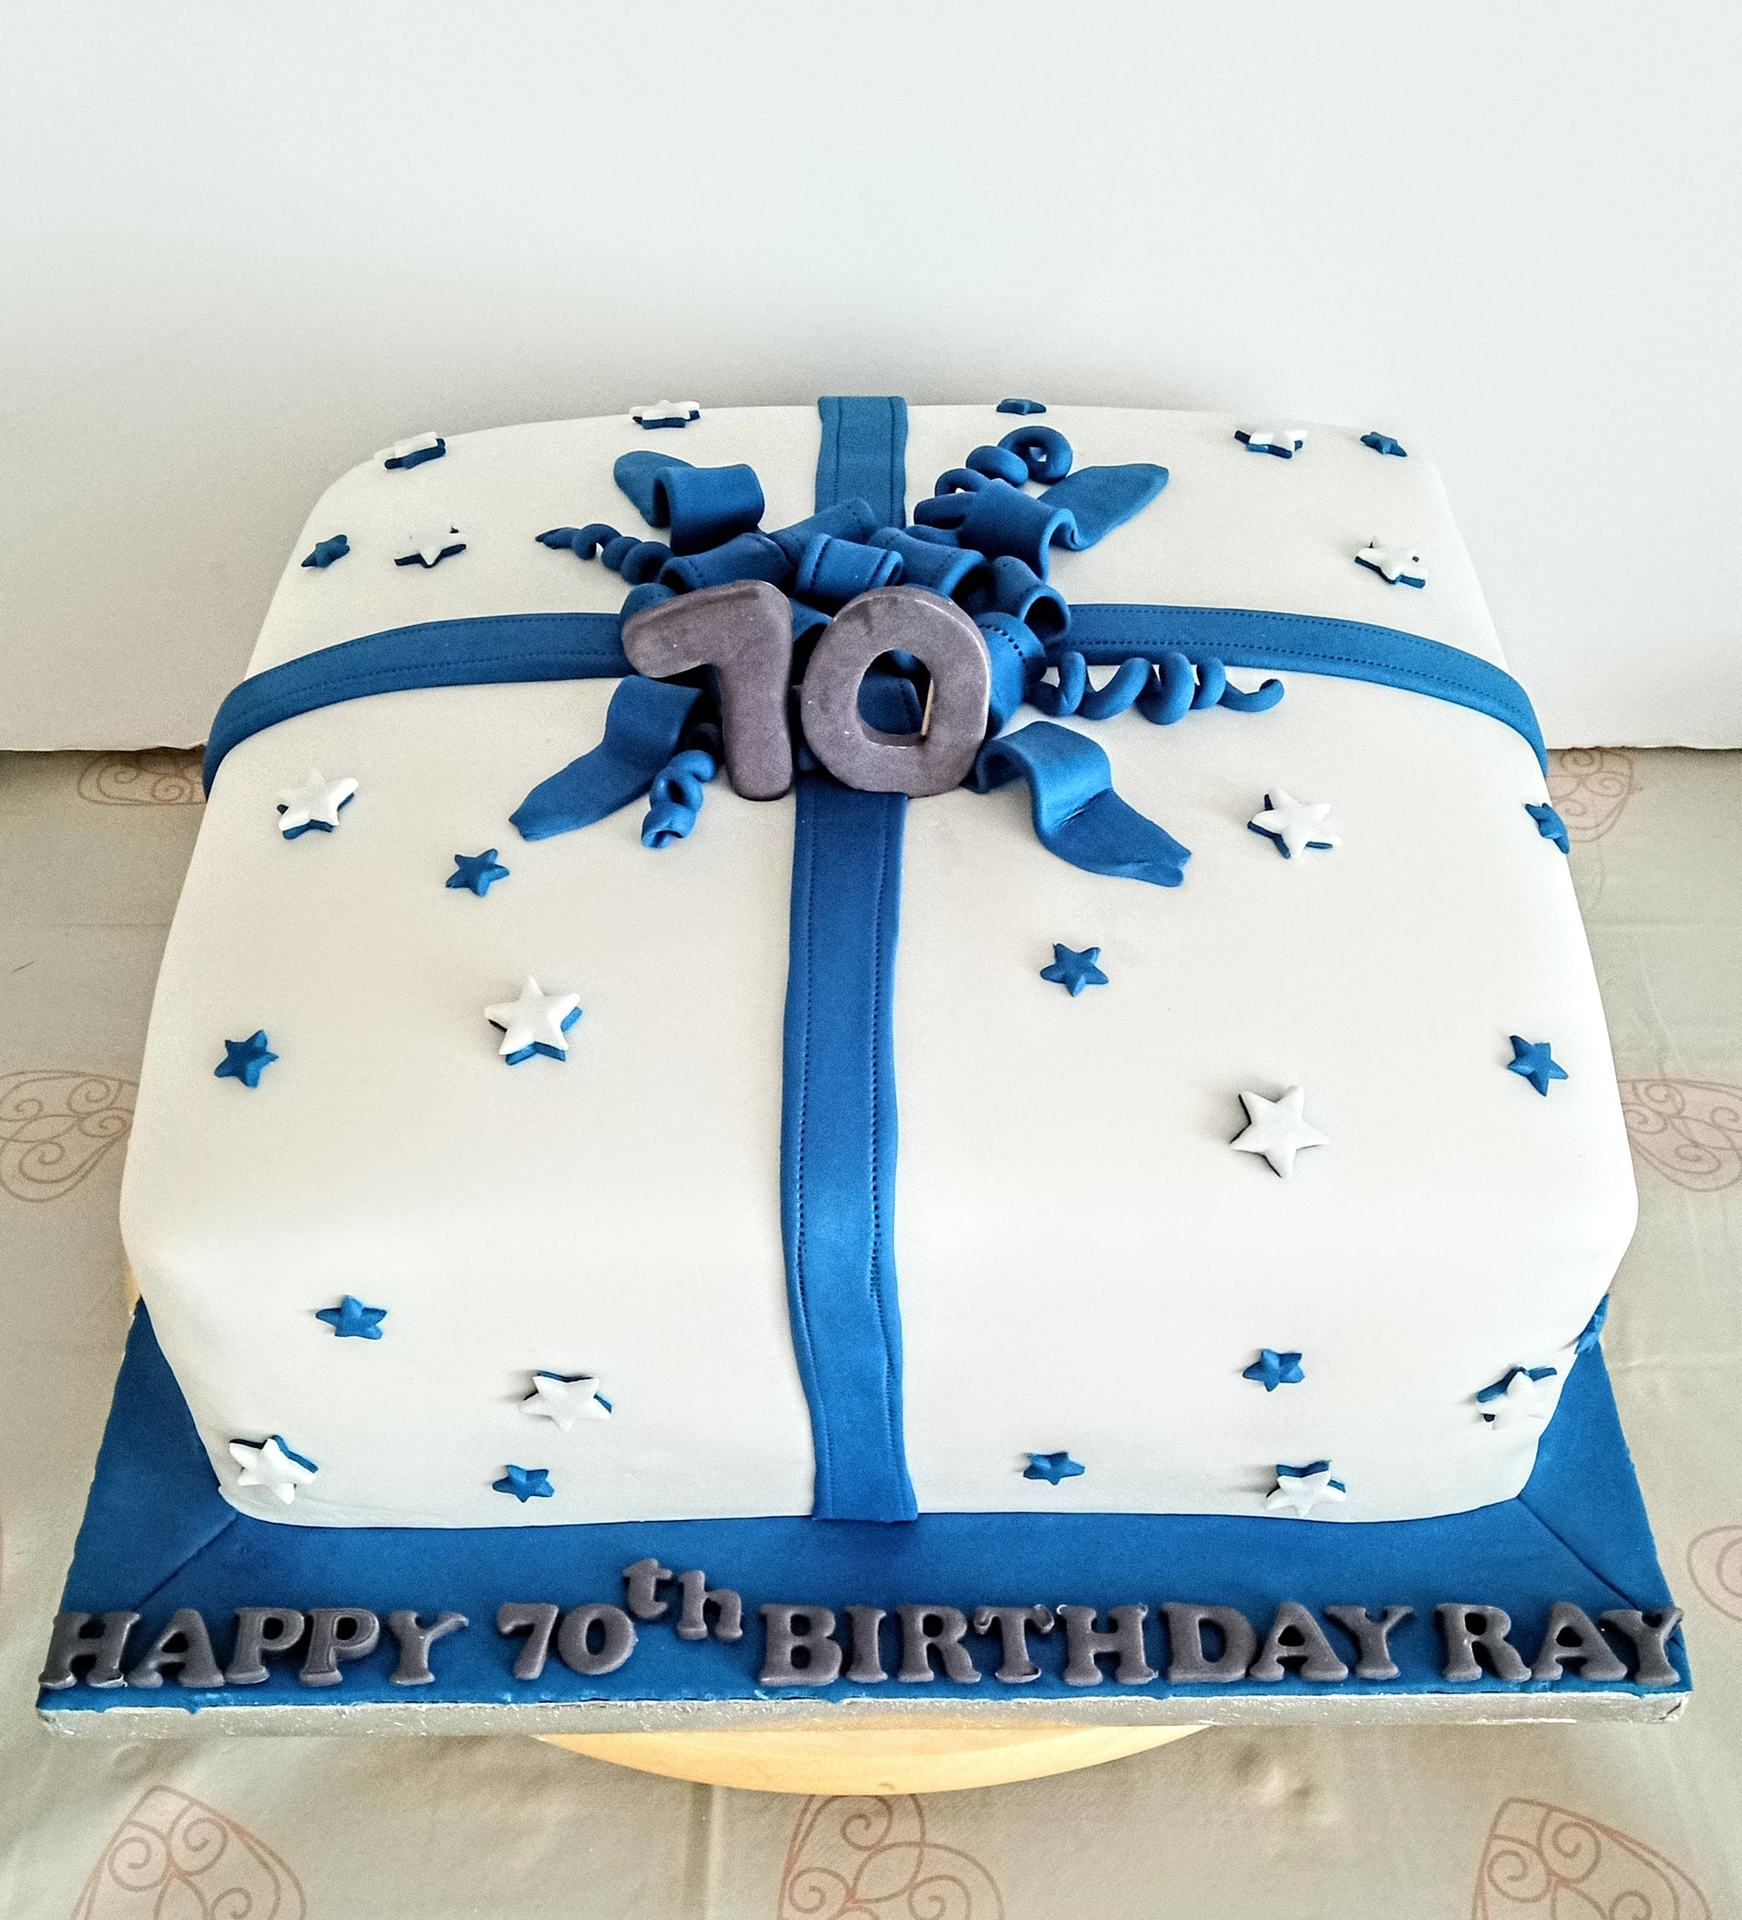 A 70th birthday present cake with star effect